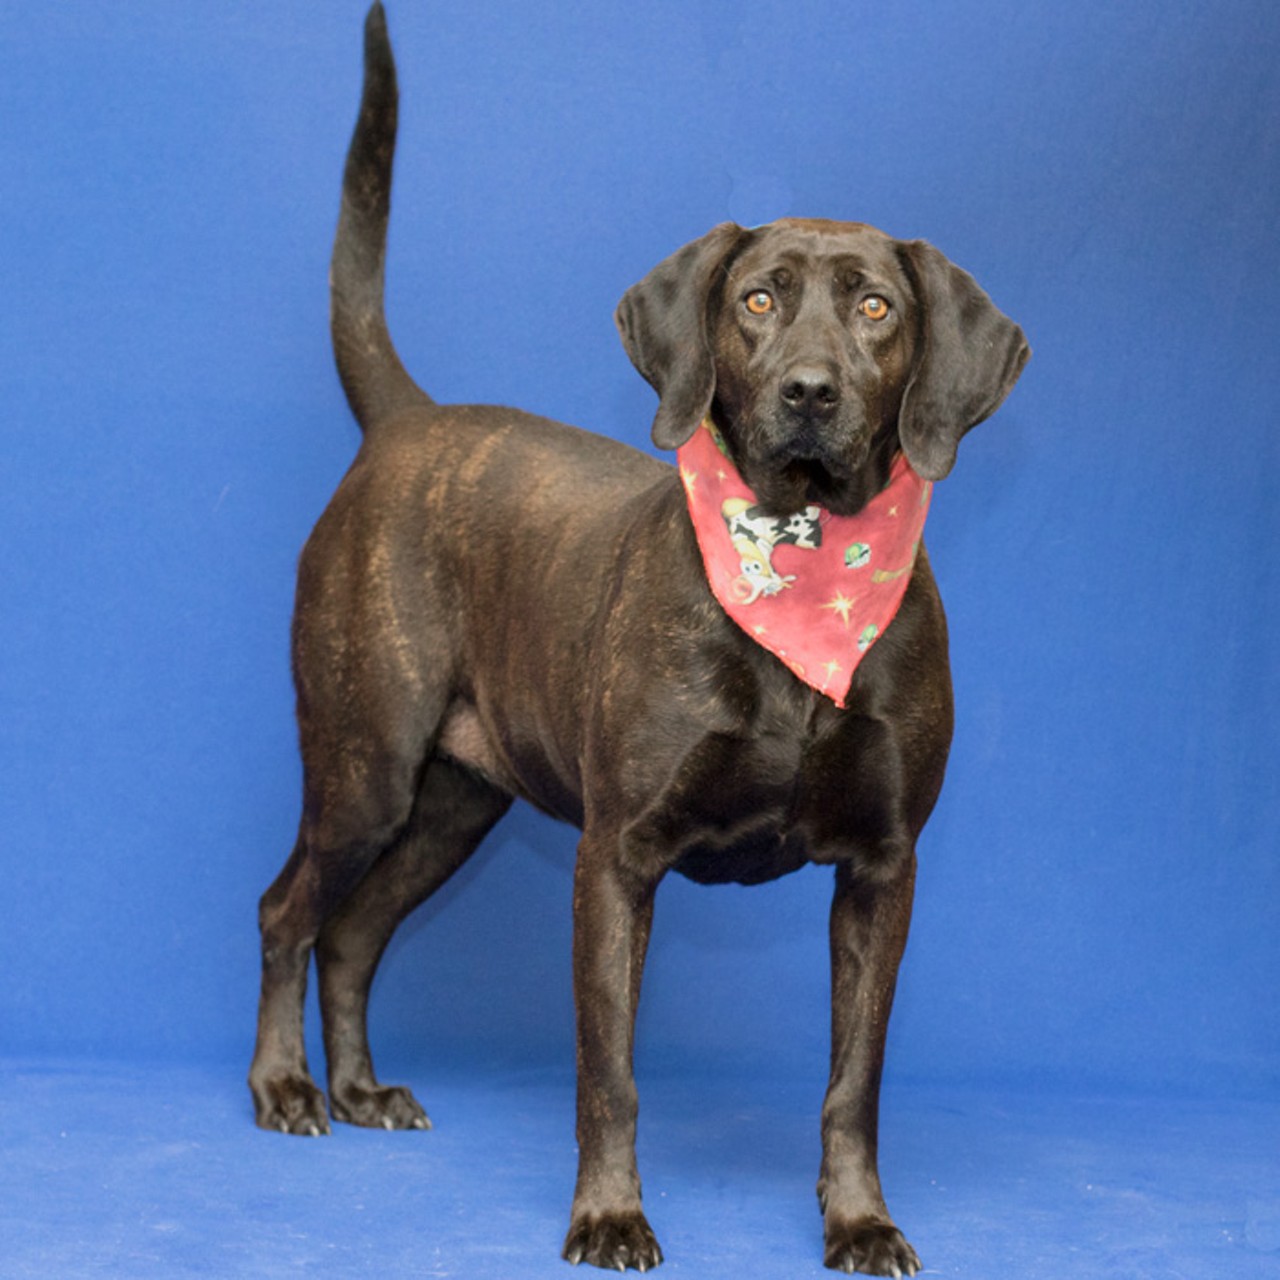  NAME: Sasha
GENDER: Female
BREED: Hound
AGE: 4 years
WEIGHT: 65 pounds
SPECIAL CONSIDERATIONS: None
REASON I CAME TO MHS: Agency transfer
LOCATION: Berman Center for Animal Care in Westland
ID NUMBER: 862891